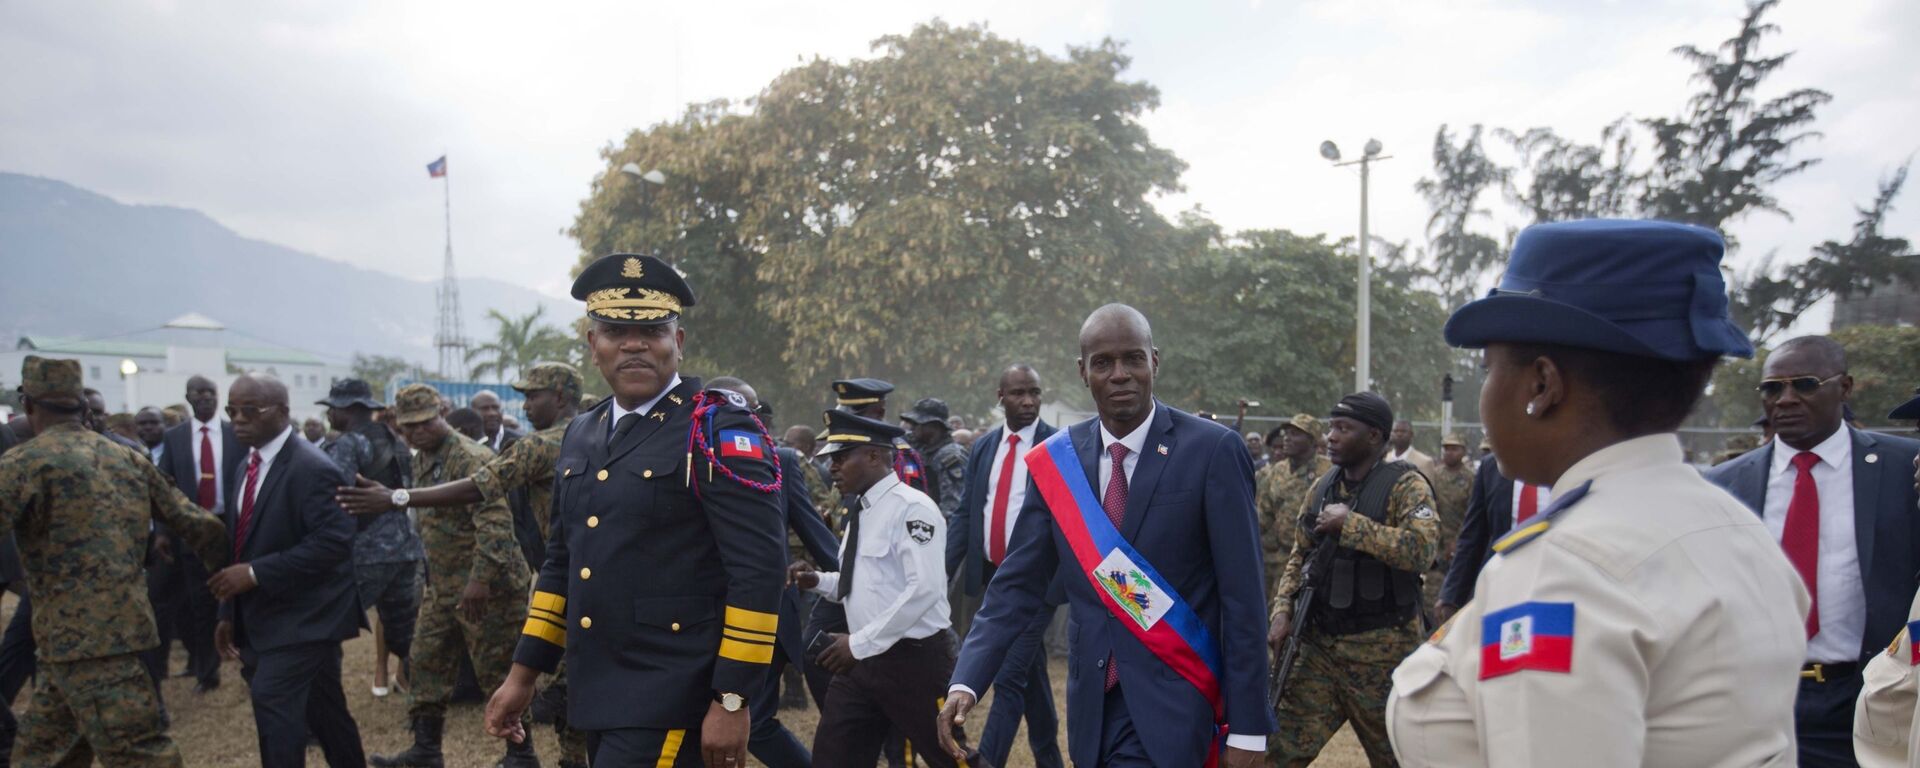 FILE - In this Feb. 7, 2017 file photo, newly sworn-in Haitian President Jovenel Moise walks with Police Chief Michel-Ange Gedeon past National Police at the National Palace after his inauguration ceremony at Parliament in Port-au-Prince, Haiti.  - Sputnik International, 1920, 07.07.2021